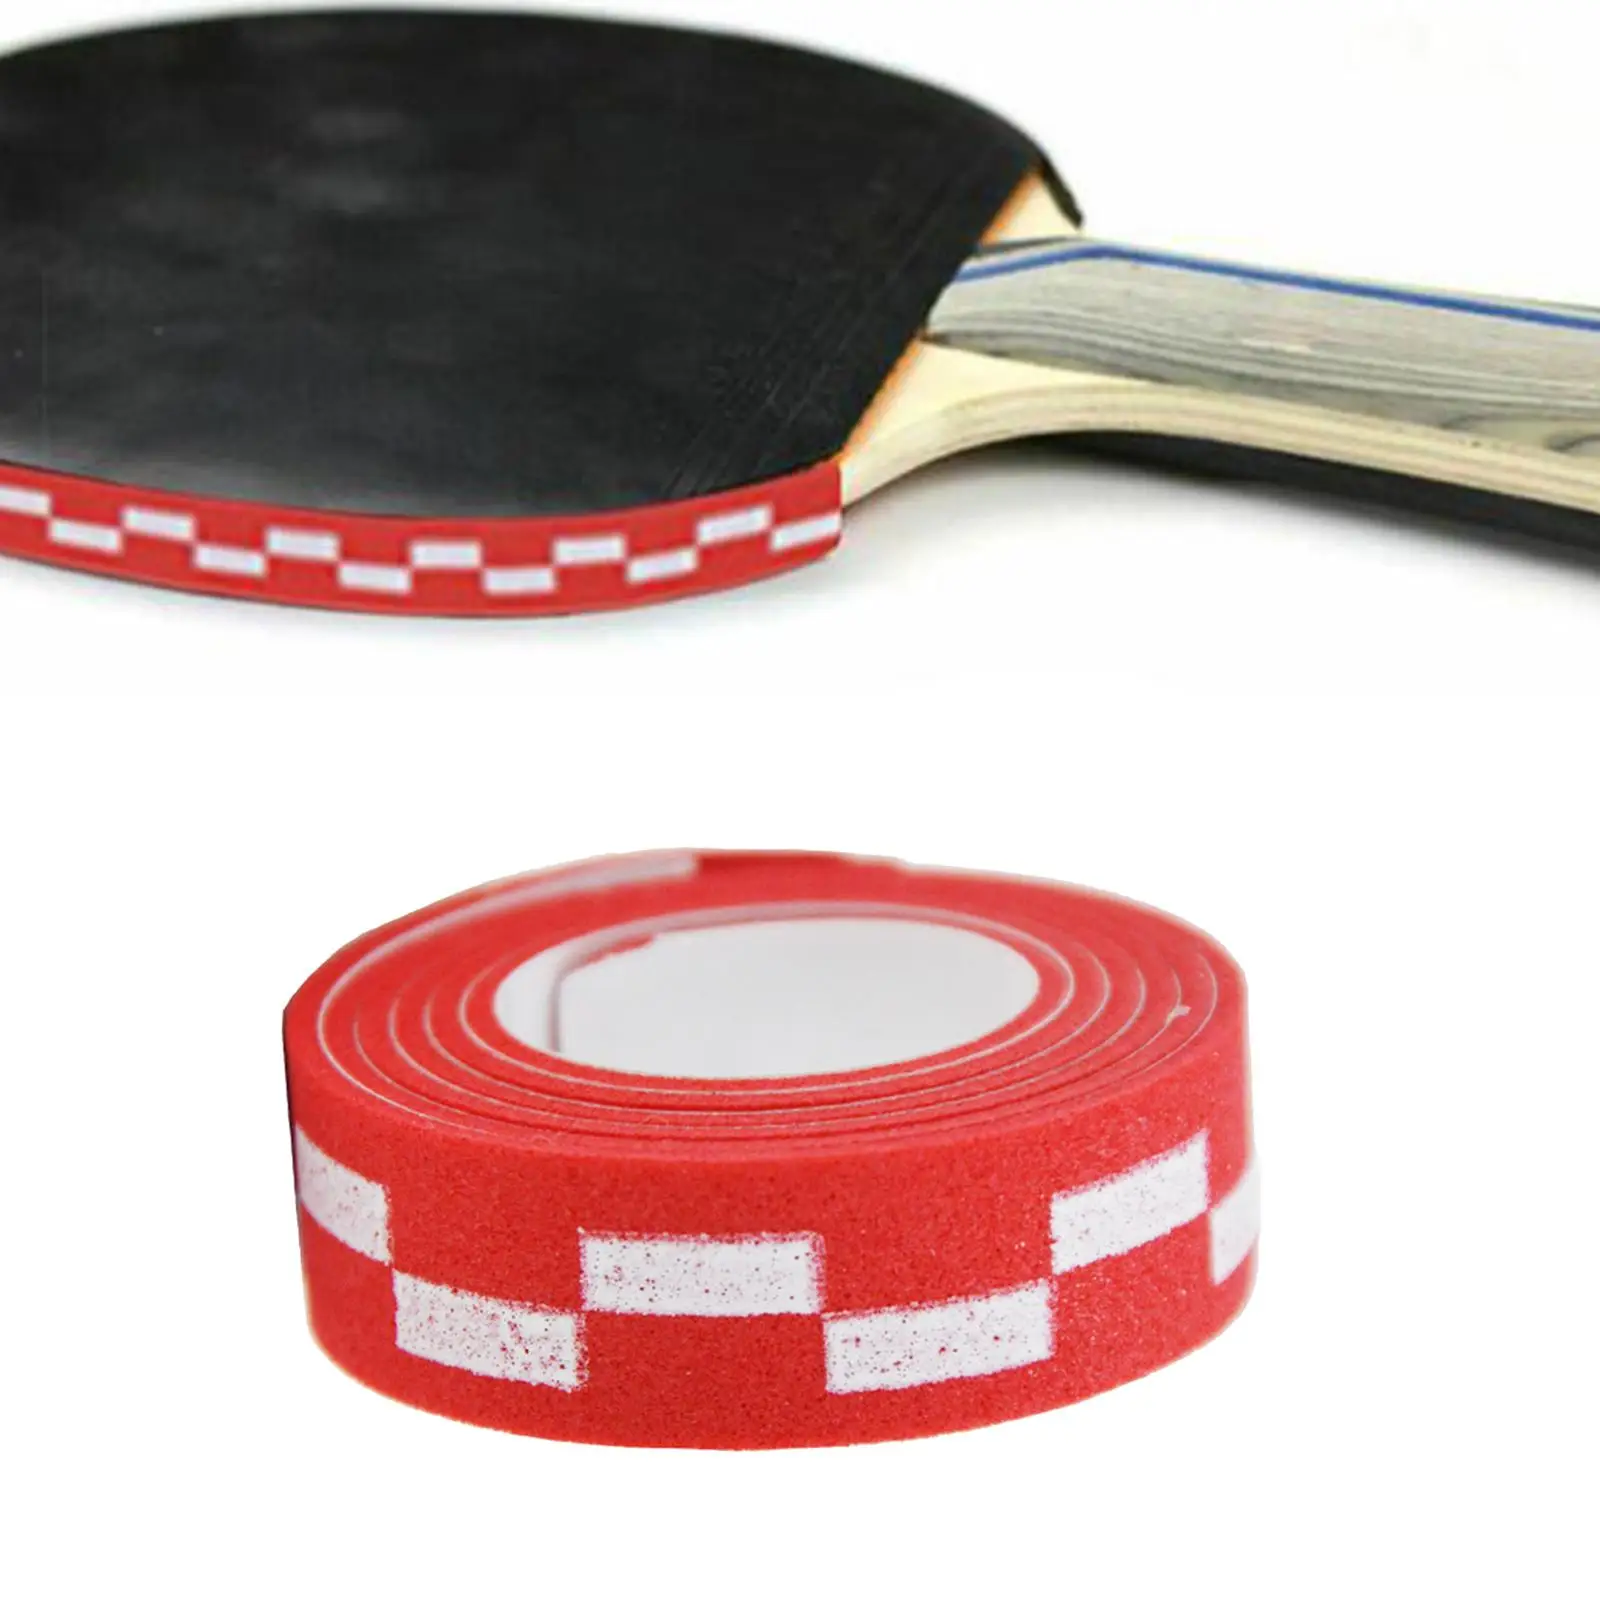 Edging tape for table tennis bats, care for table tennis bats, 10 mm